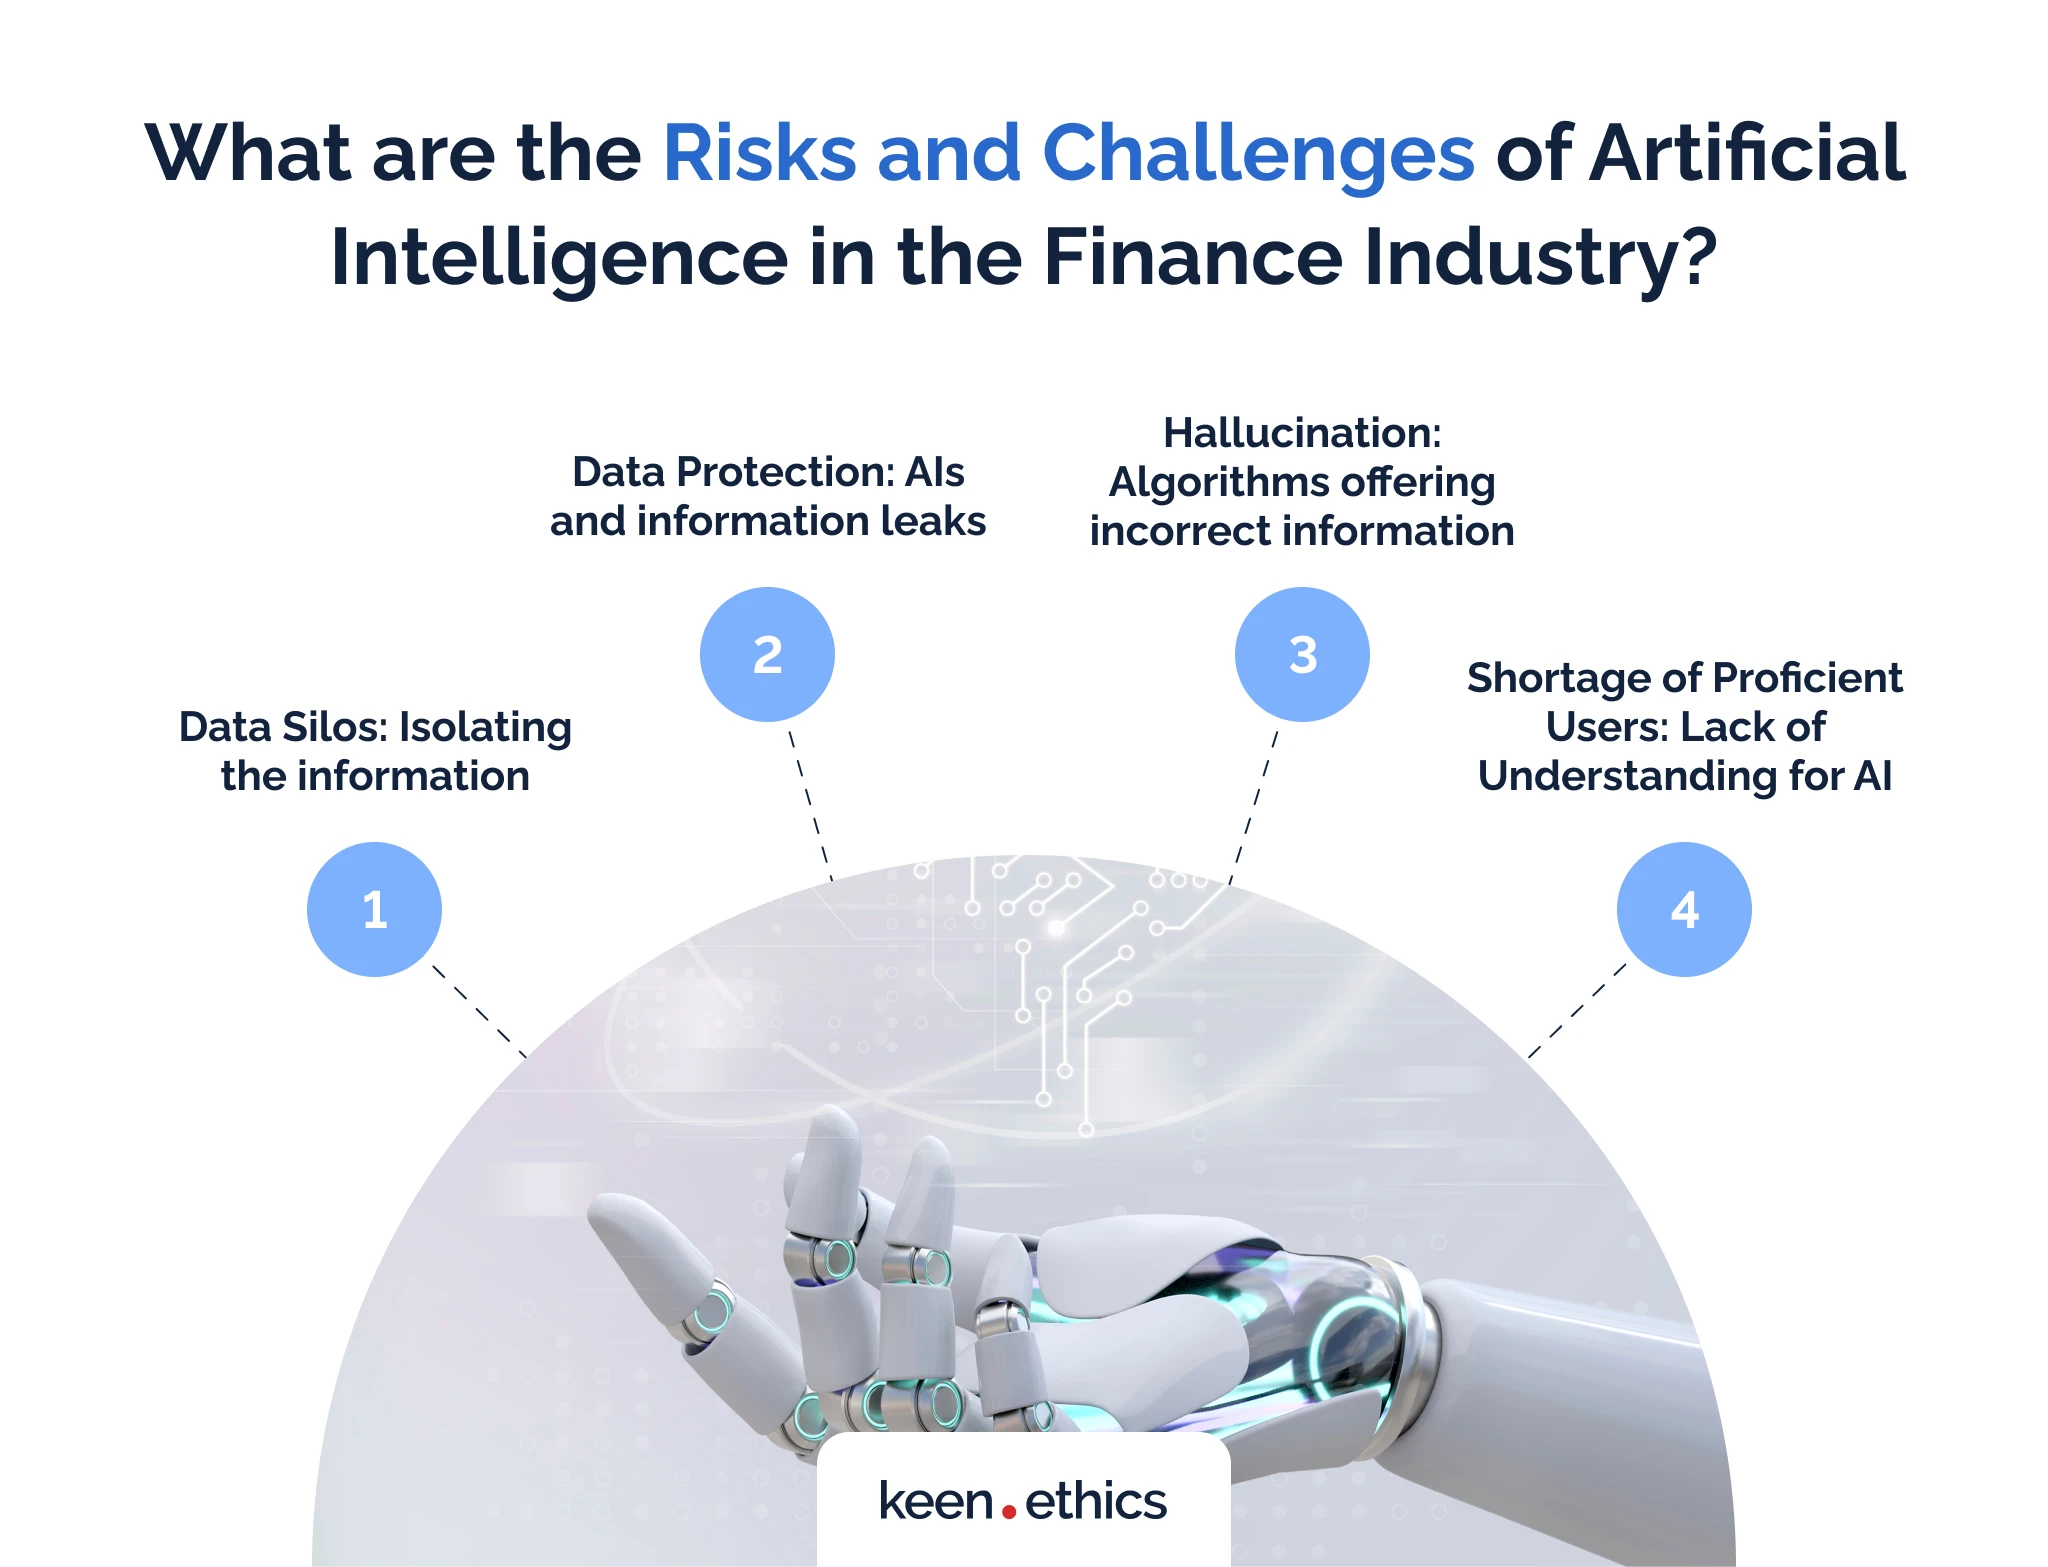 What are the risks and challenges of artificial intelligence in the finance industry?